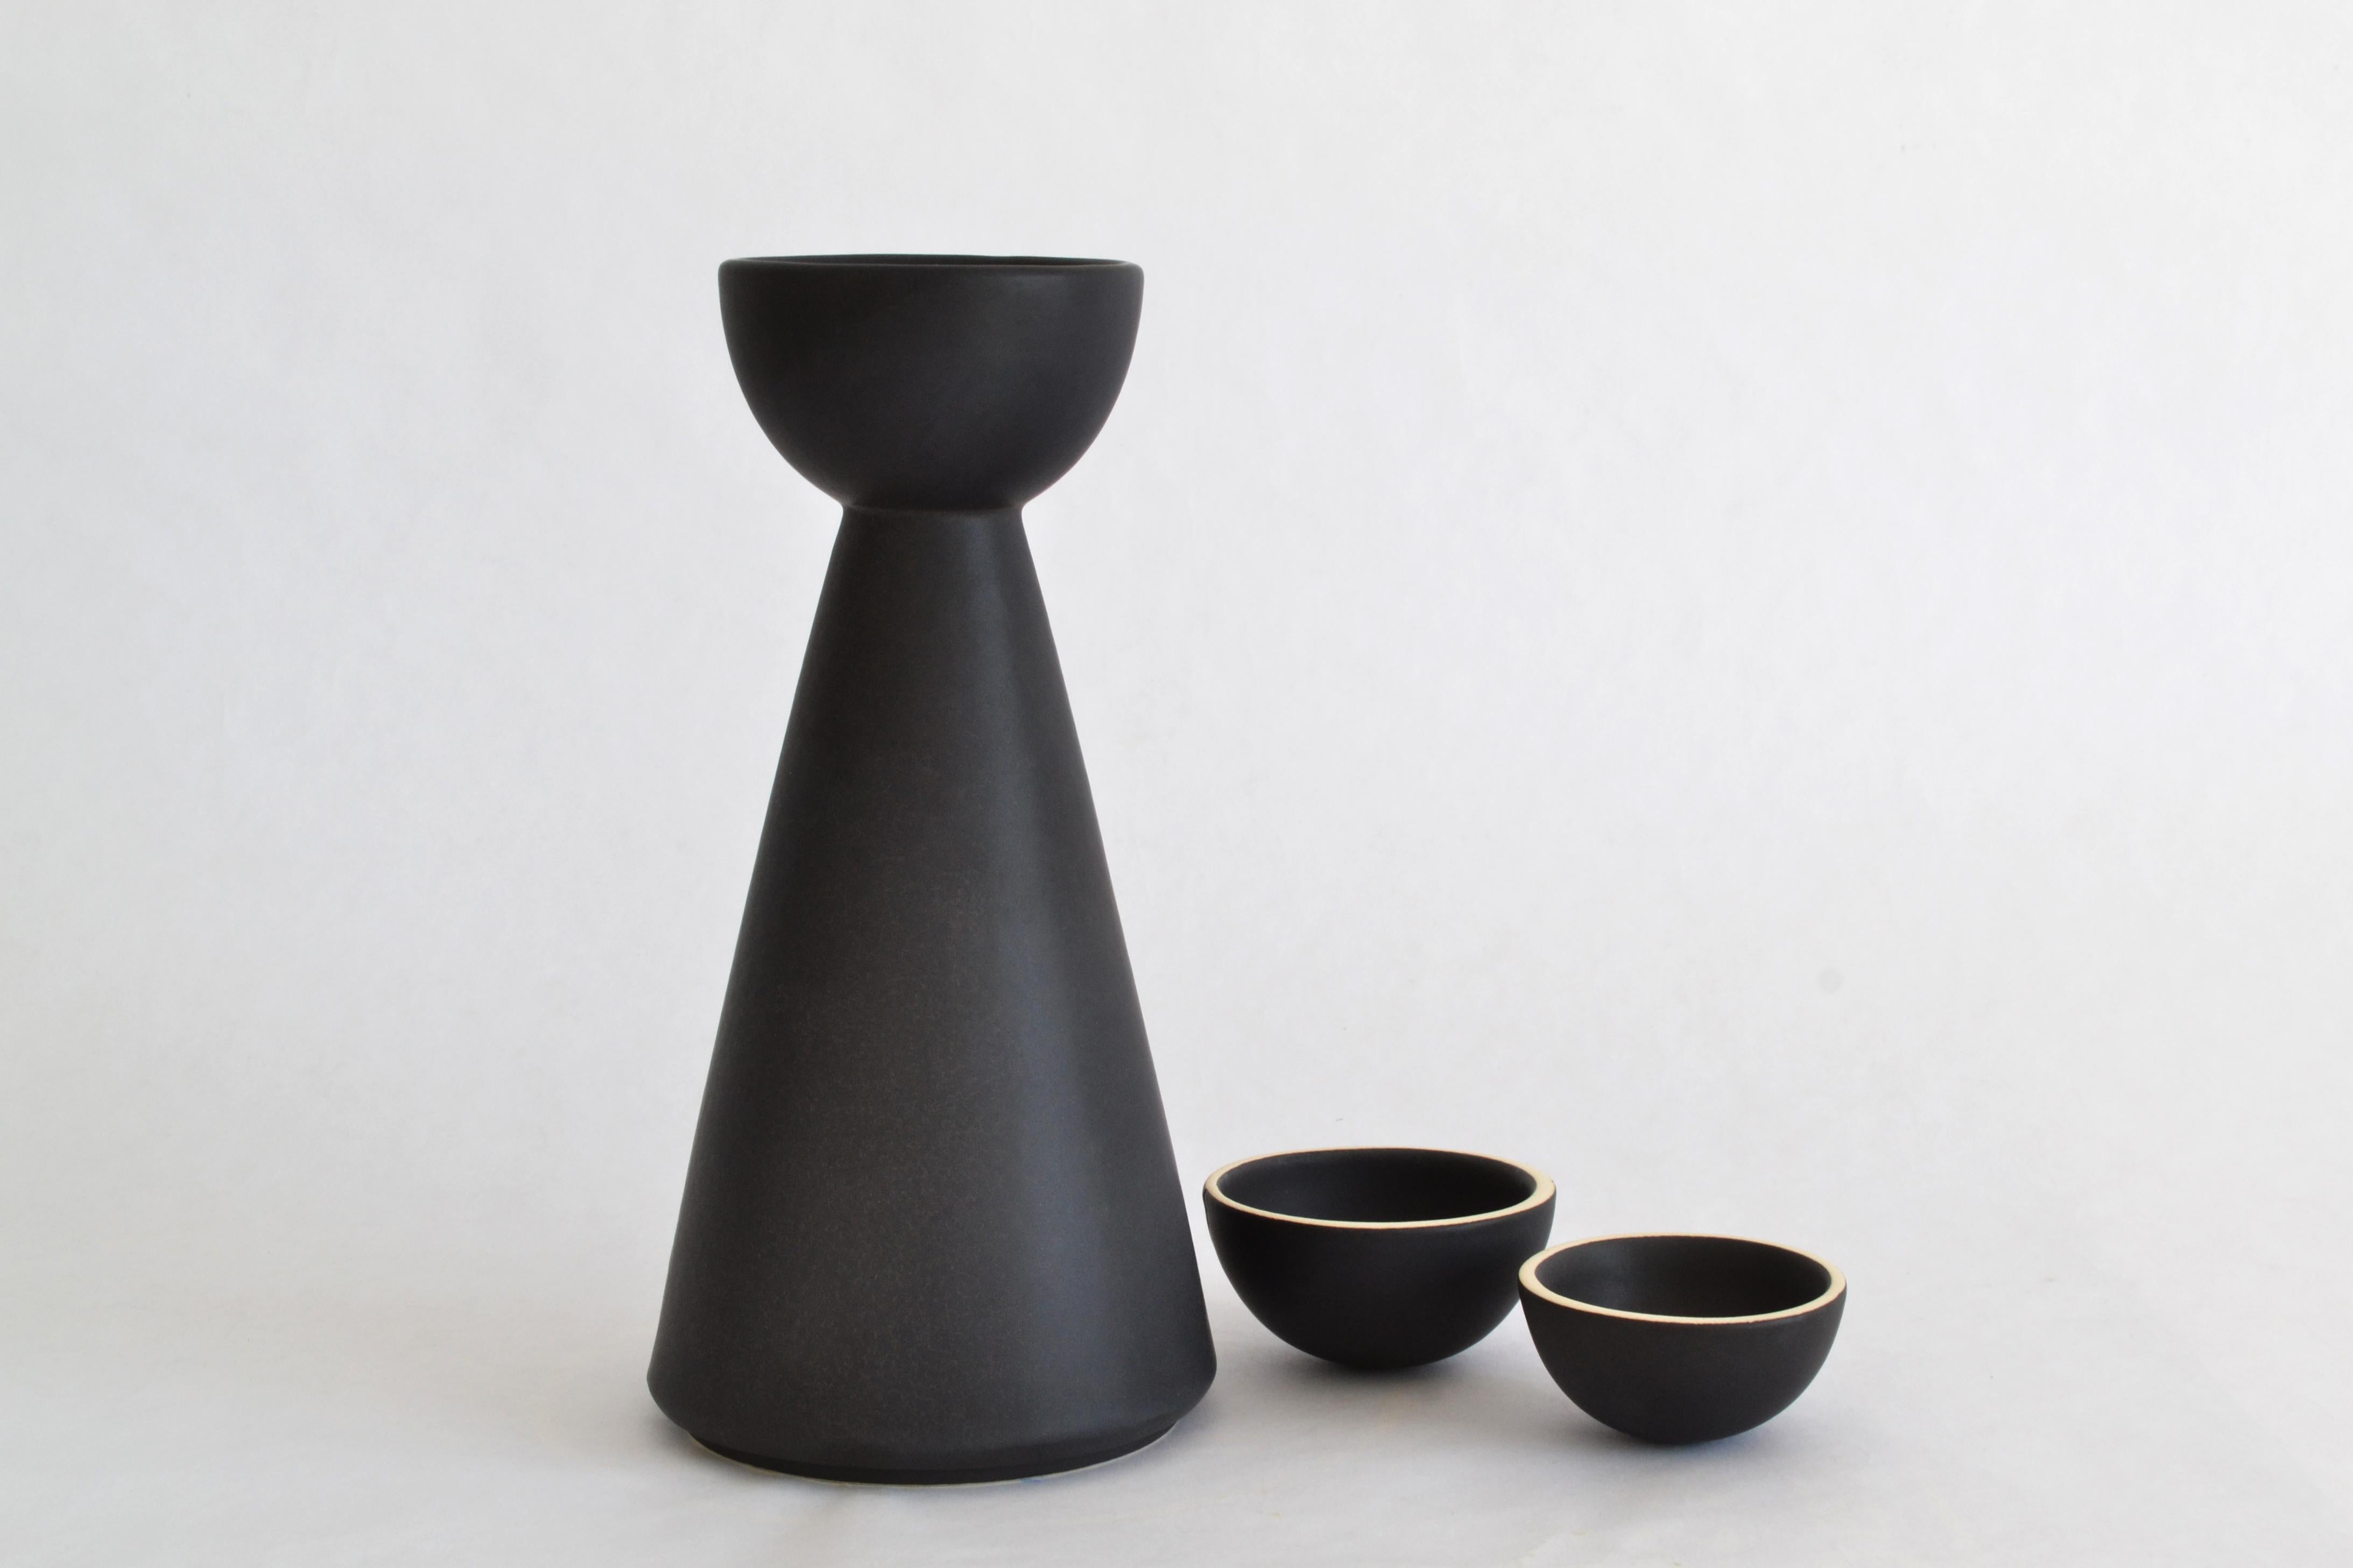 BLACK Carafe Contemporary Inspired by Traditional Jug Pitcher for Mezcal Neuf - En vente à London, GB